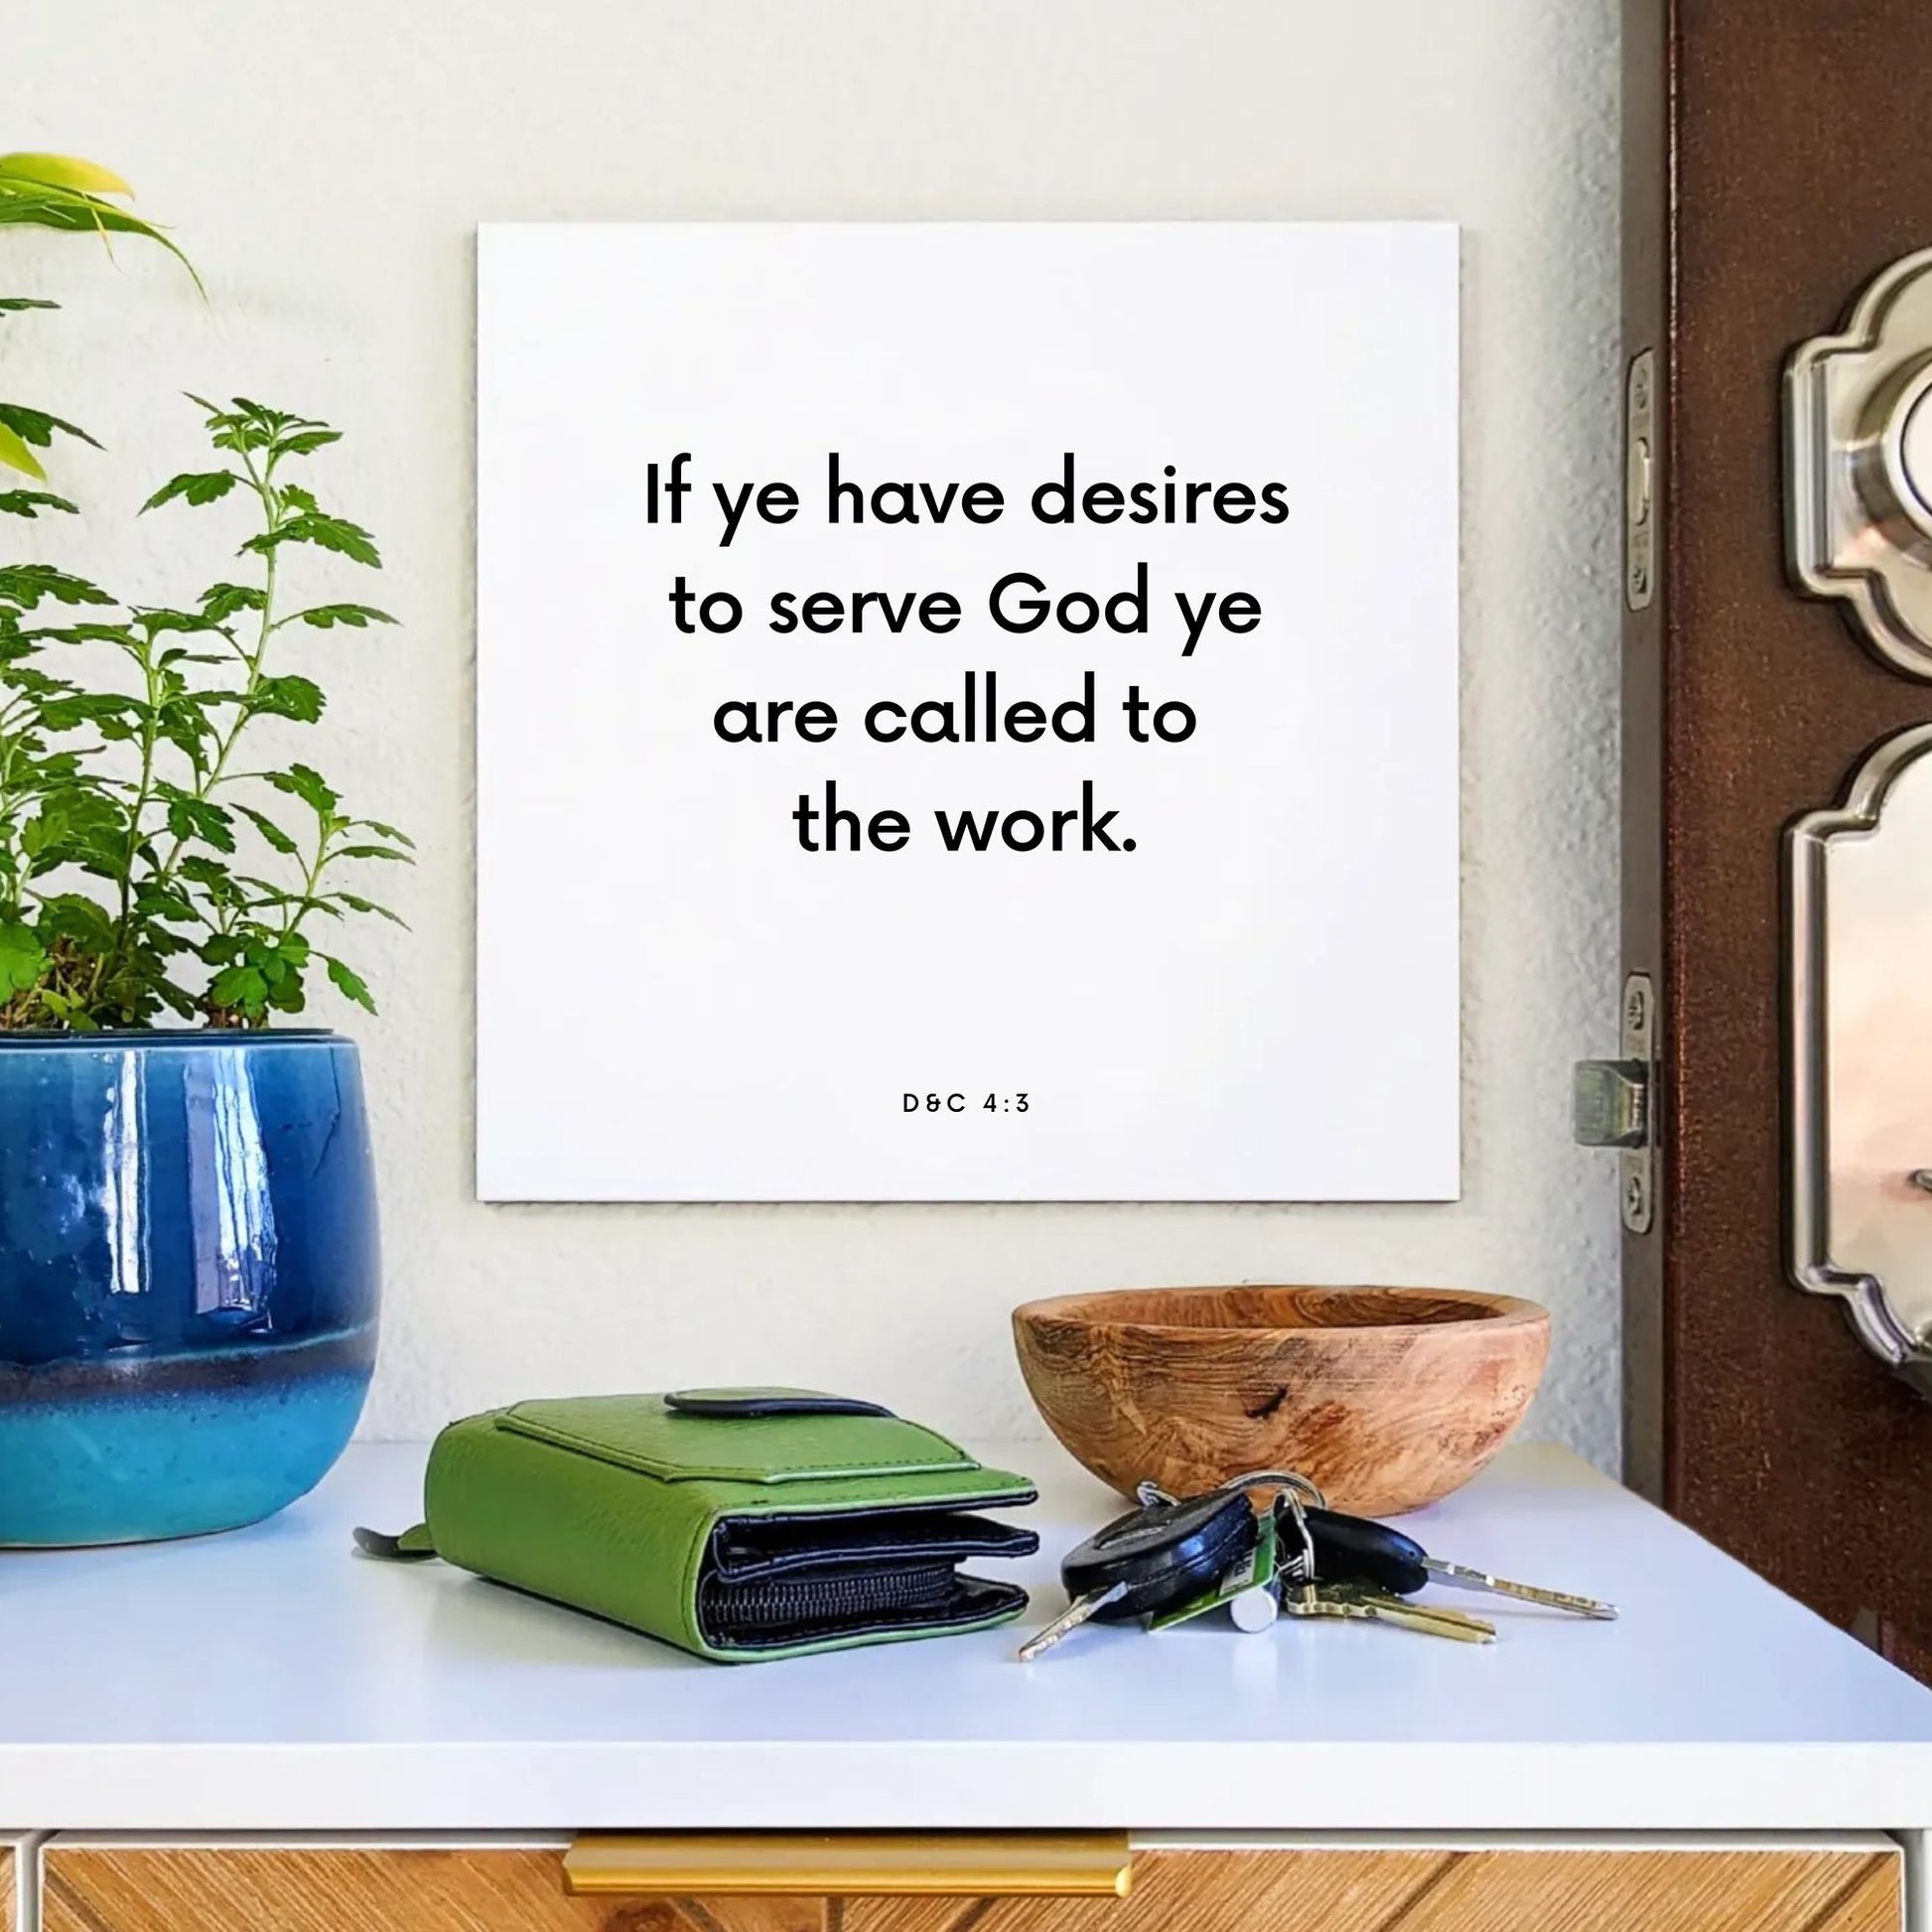 Entryway mouting of the scripture tile for D&C 4:3 - "If ye have desires to serve God ye are called to the work"